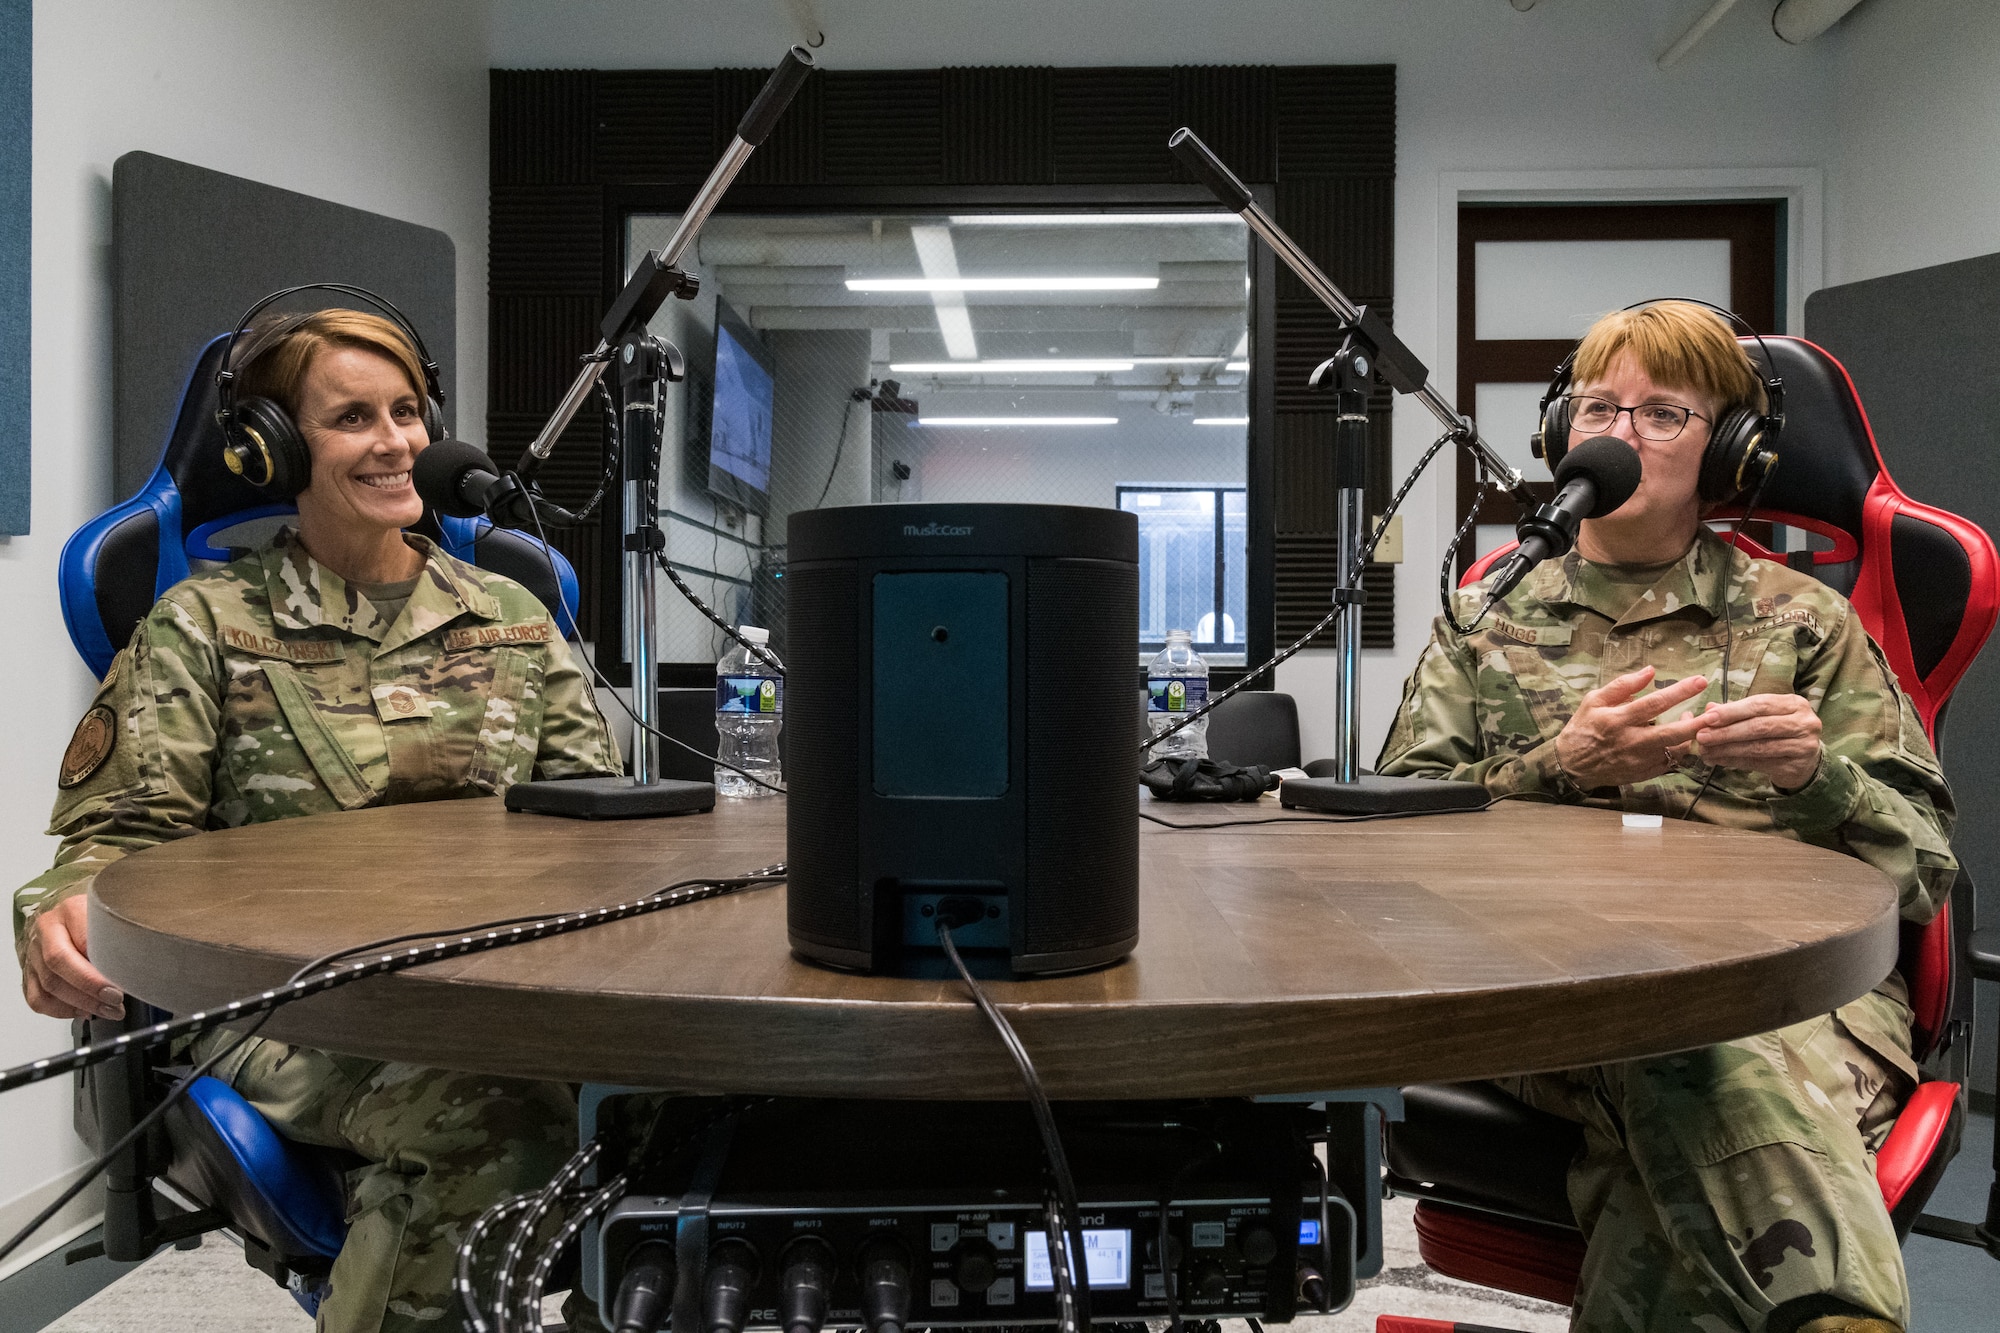 From the left, Chief Master Sgt. Dawn Kolczynski, U.S. Air Force surgeon general chief of medical operations, and Lt. Gen. Dorothy Hogg, U.S. Air Force surgeon general, were guests for a podcast from Dover’s Bedrock Innovation Lab, June 26, 2020, at Dover Air Force Base, Delaware. Hogg and Kolczynski talked to podcast listeners about COVID-19, innovation and leadership from their perspectives. (U.S. Air Force photo by Roland Balik)